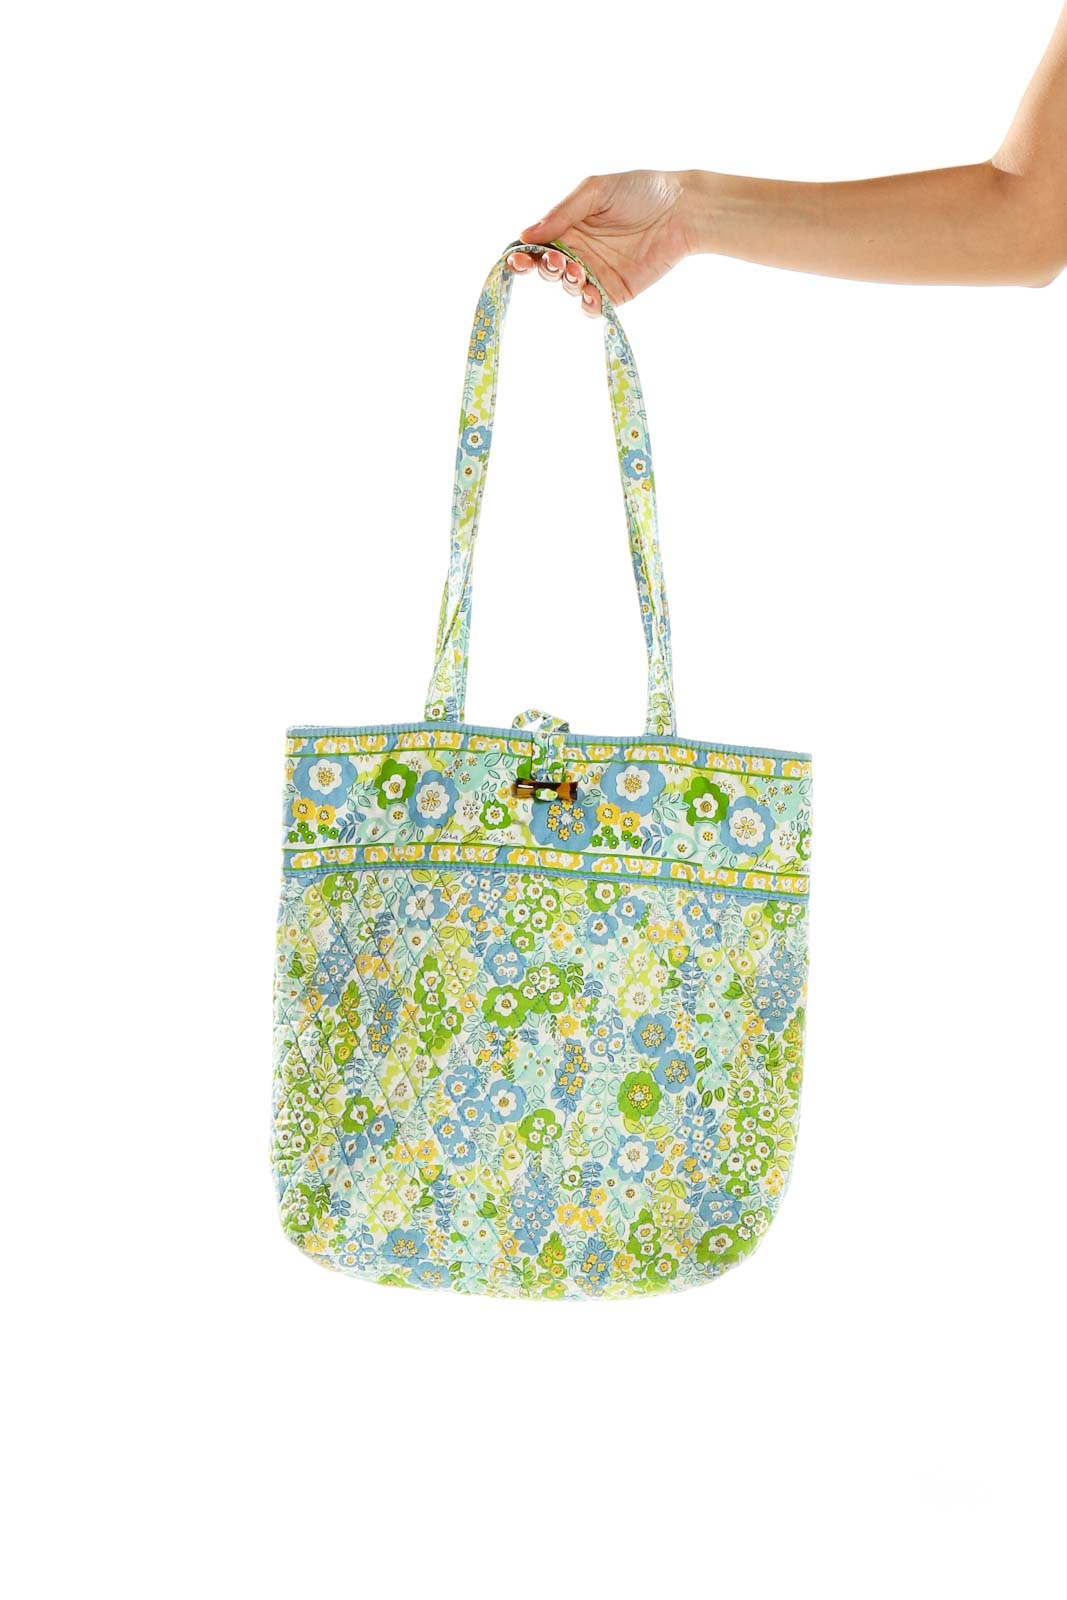 Multicolor Quilted Floral Print Tote Bag Front